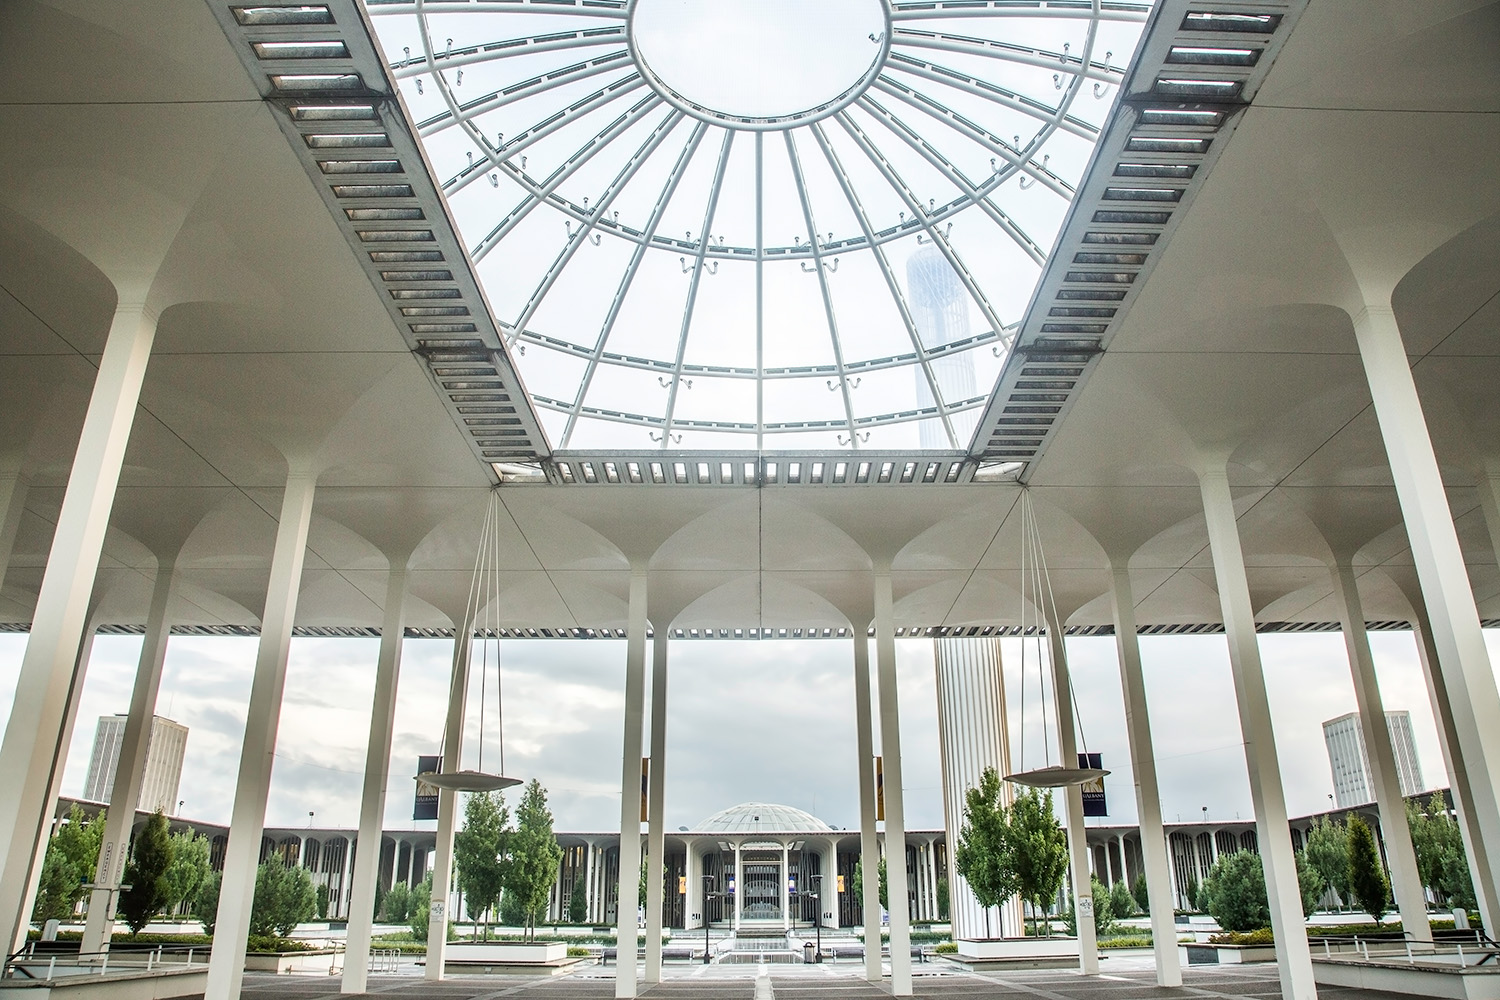 UAlbany's main campus shot with tall columns holding up a windowed roofing structure. The campus fountain can be seen in the background. It is a cloudy but beautiful day on campus.